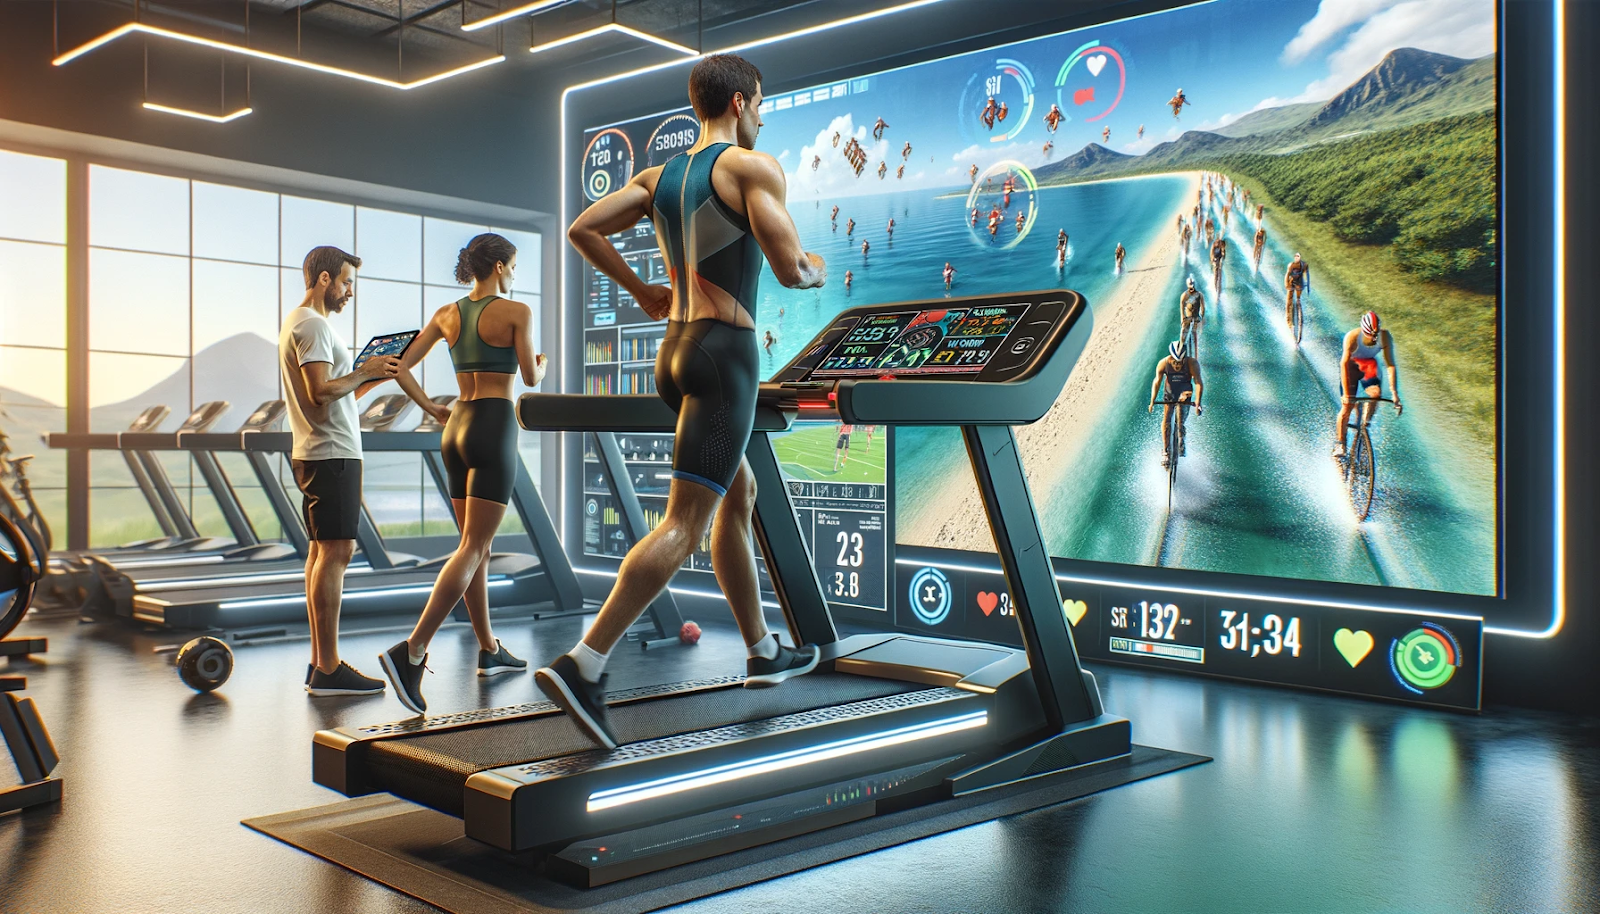 The male athlete is engaged with the smart treadmill, focusing on his performance metrics. The coach, a professional female figure in sports attire, is closely observing the data on her tablet, ready to provide expert guidance